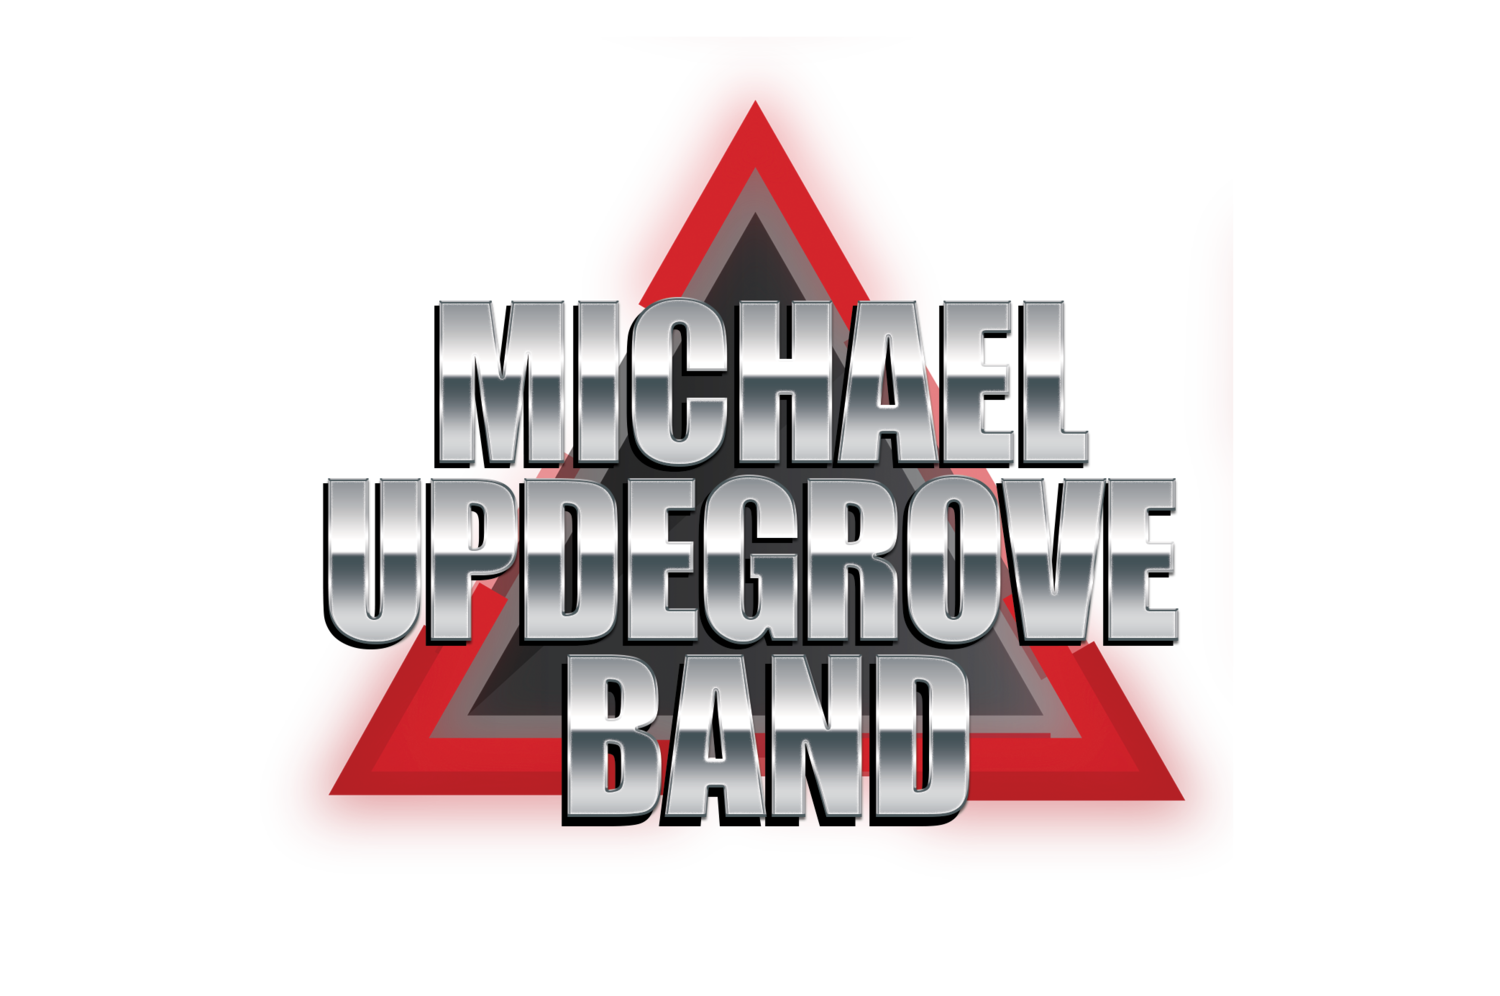 The Michael Updegrove Band